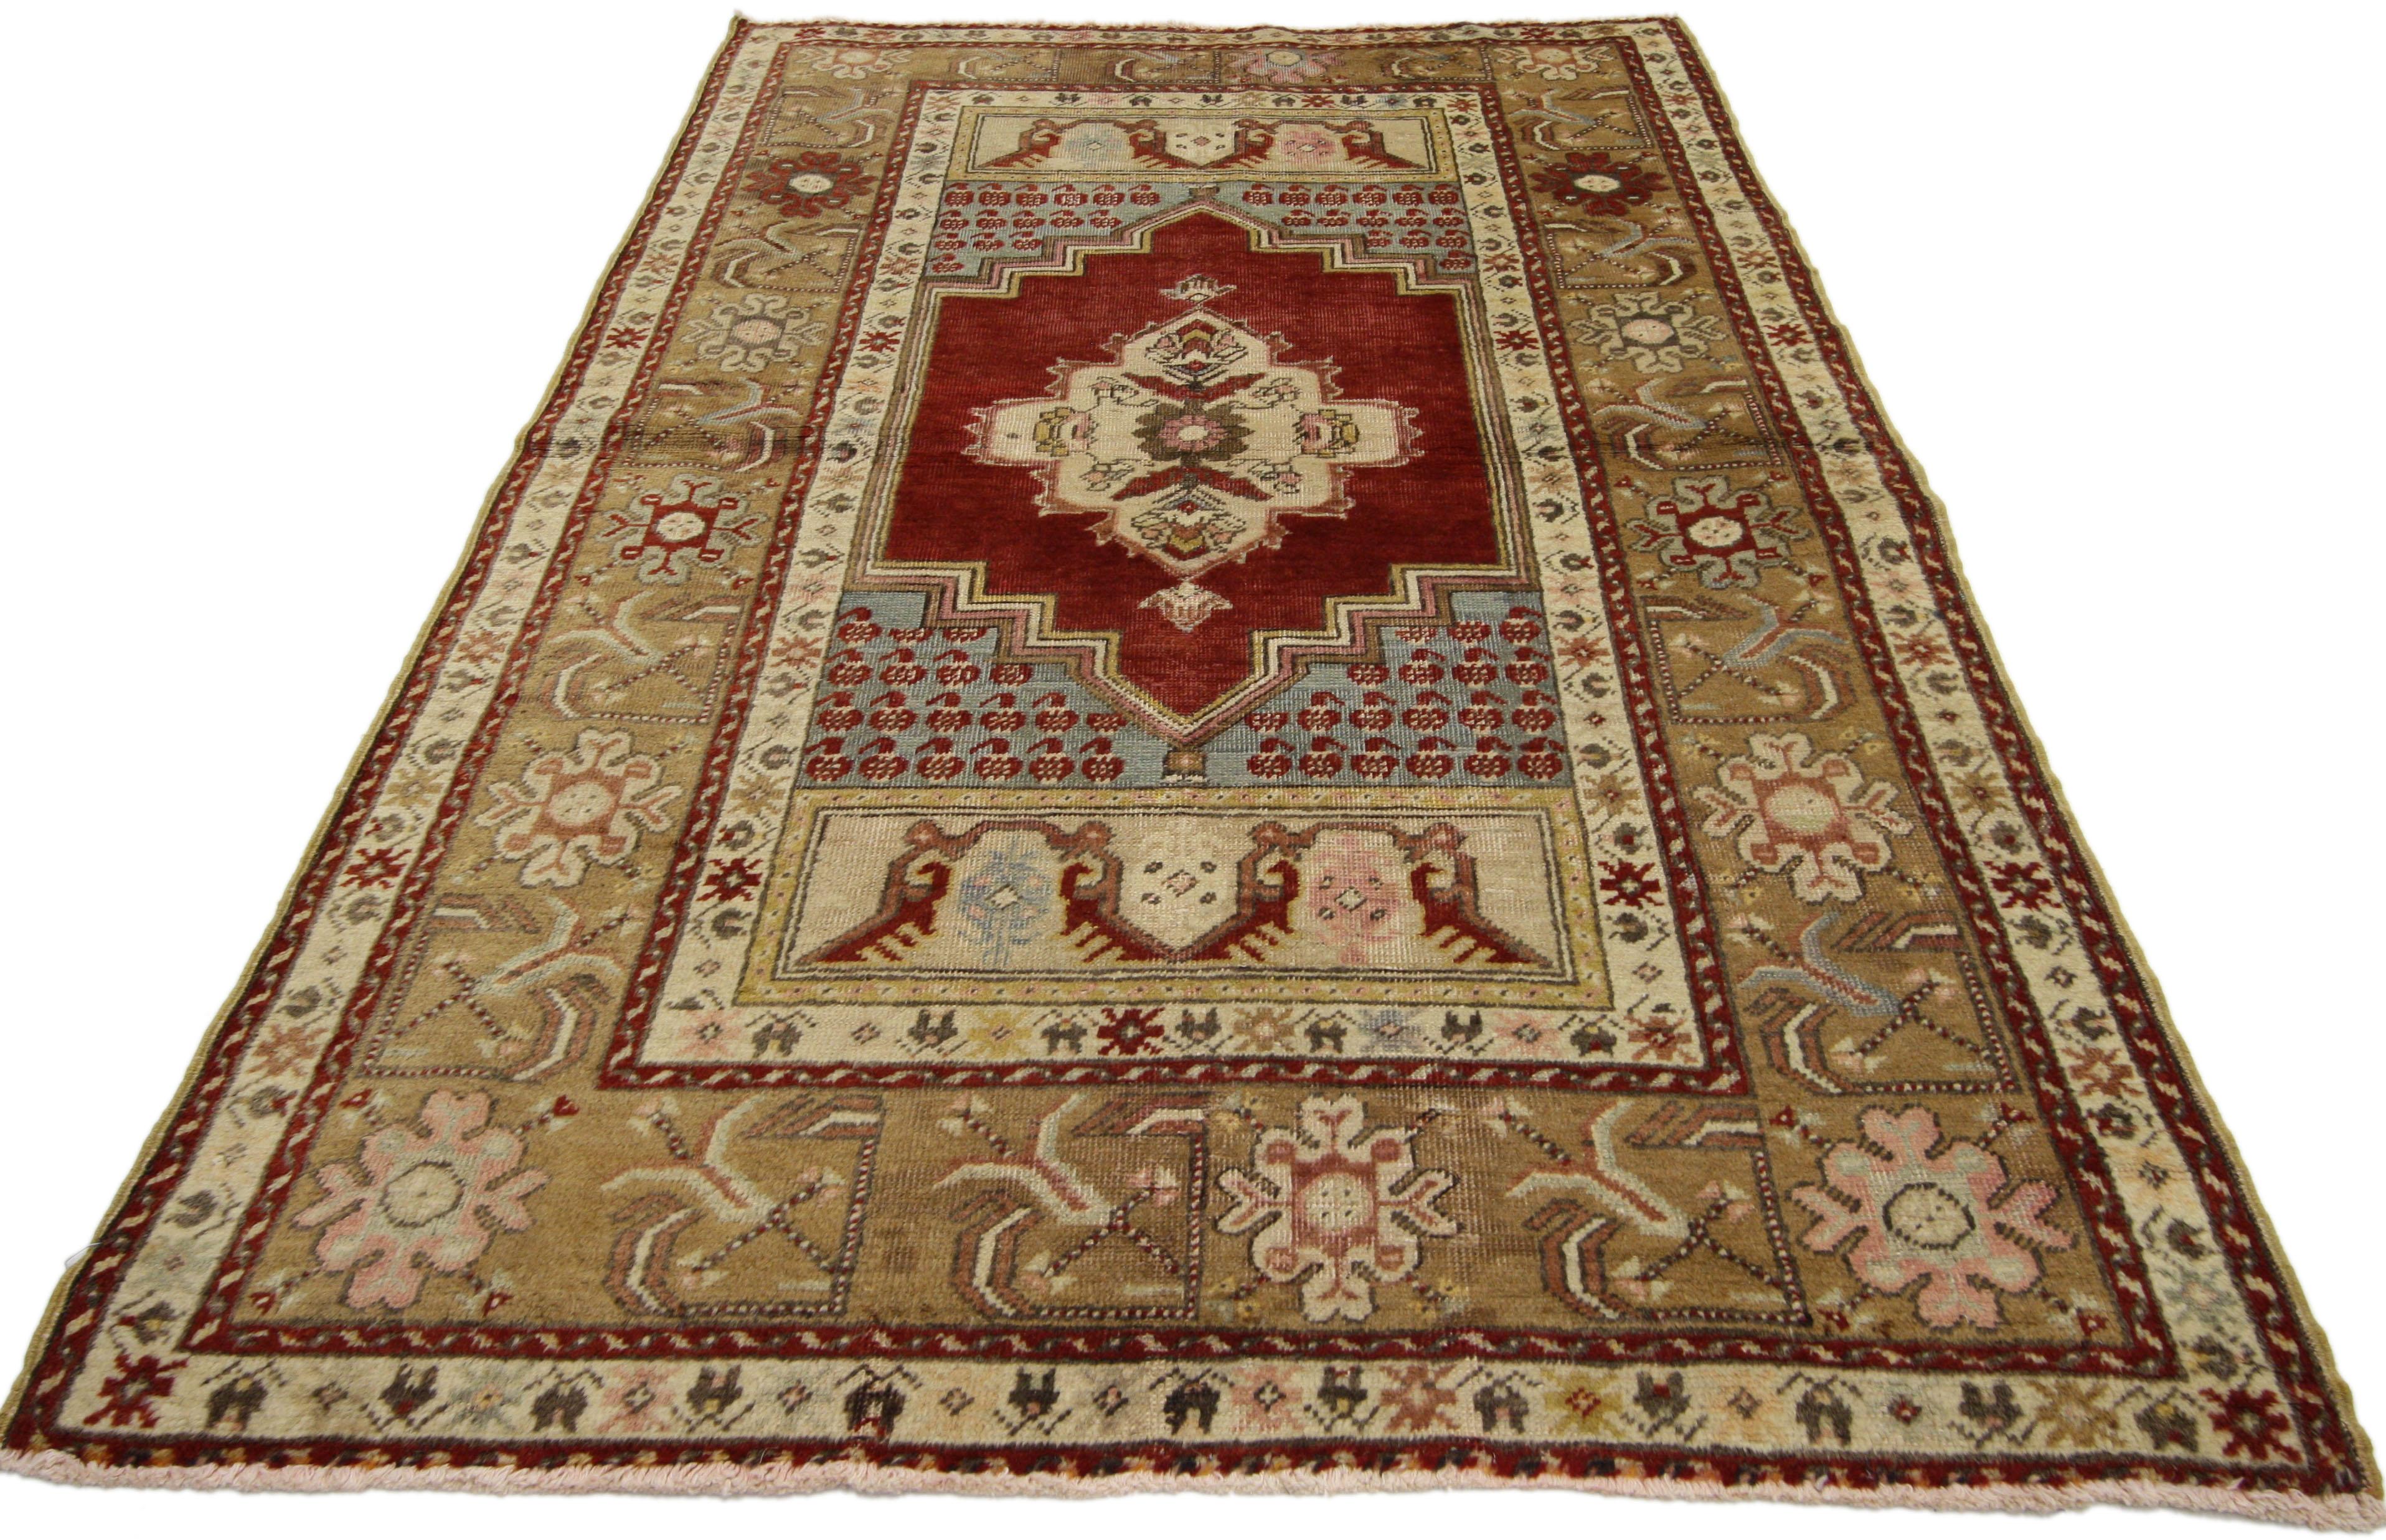 50343 Vintage Turkish Oushak Rug, Foyer, Kitchen or Entry Rug 03'06 x 05'09. ​This vintage Turkish Oushak rug features a modern traditional style. Immersed in Anatolian history and refined colors, this vintage Oushak rug combines simplicity with